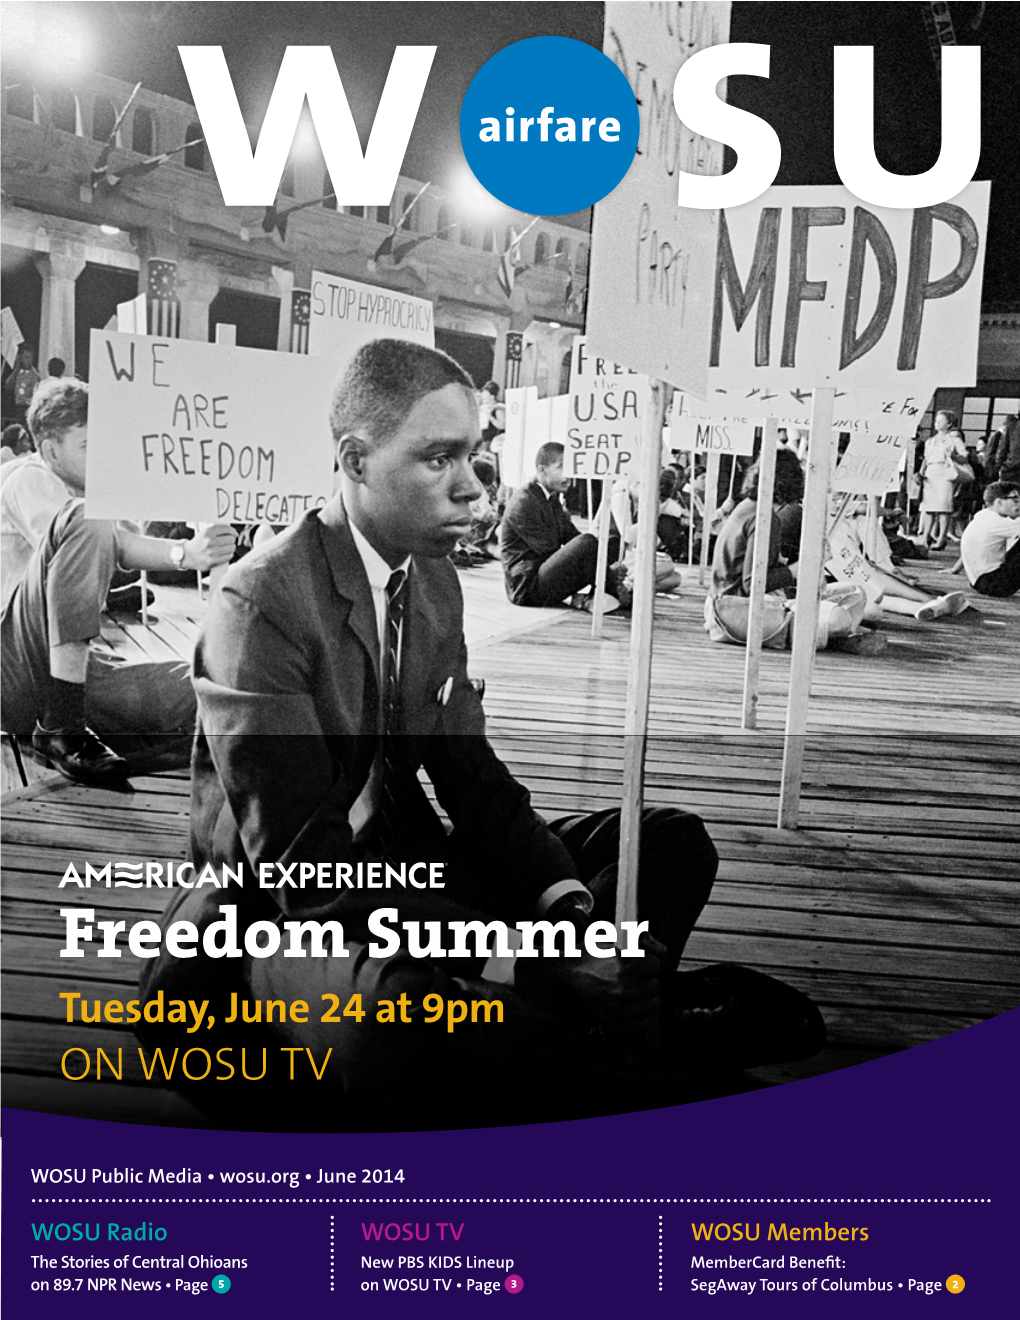 Freedom Summer Tuesday, June 24 at 9Pm on WOSU TV